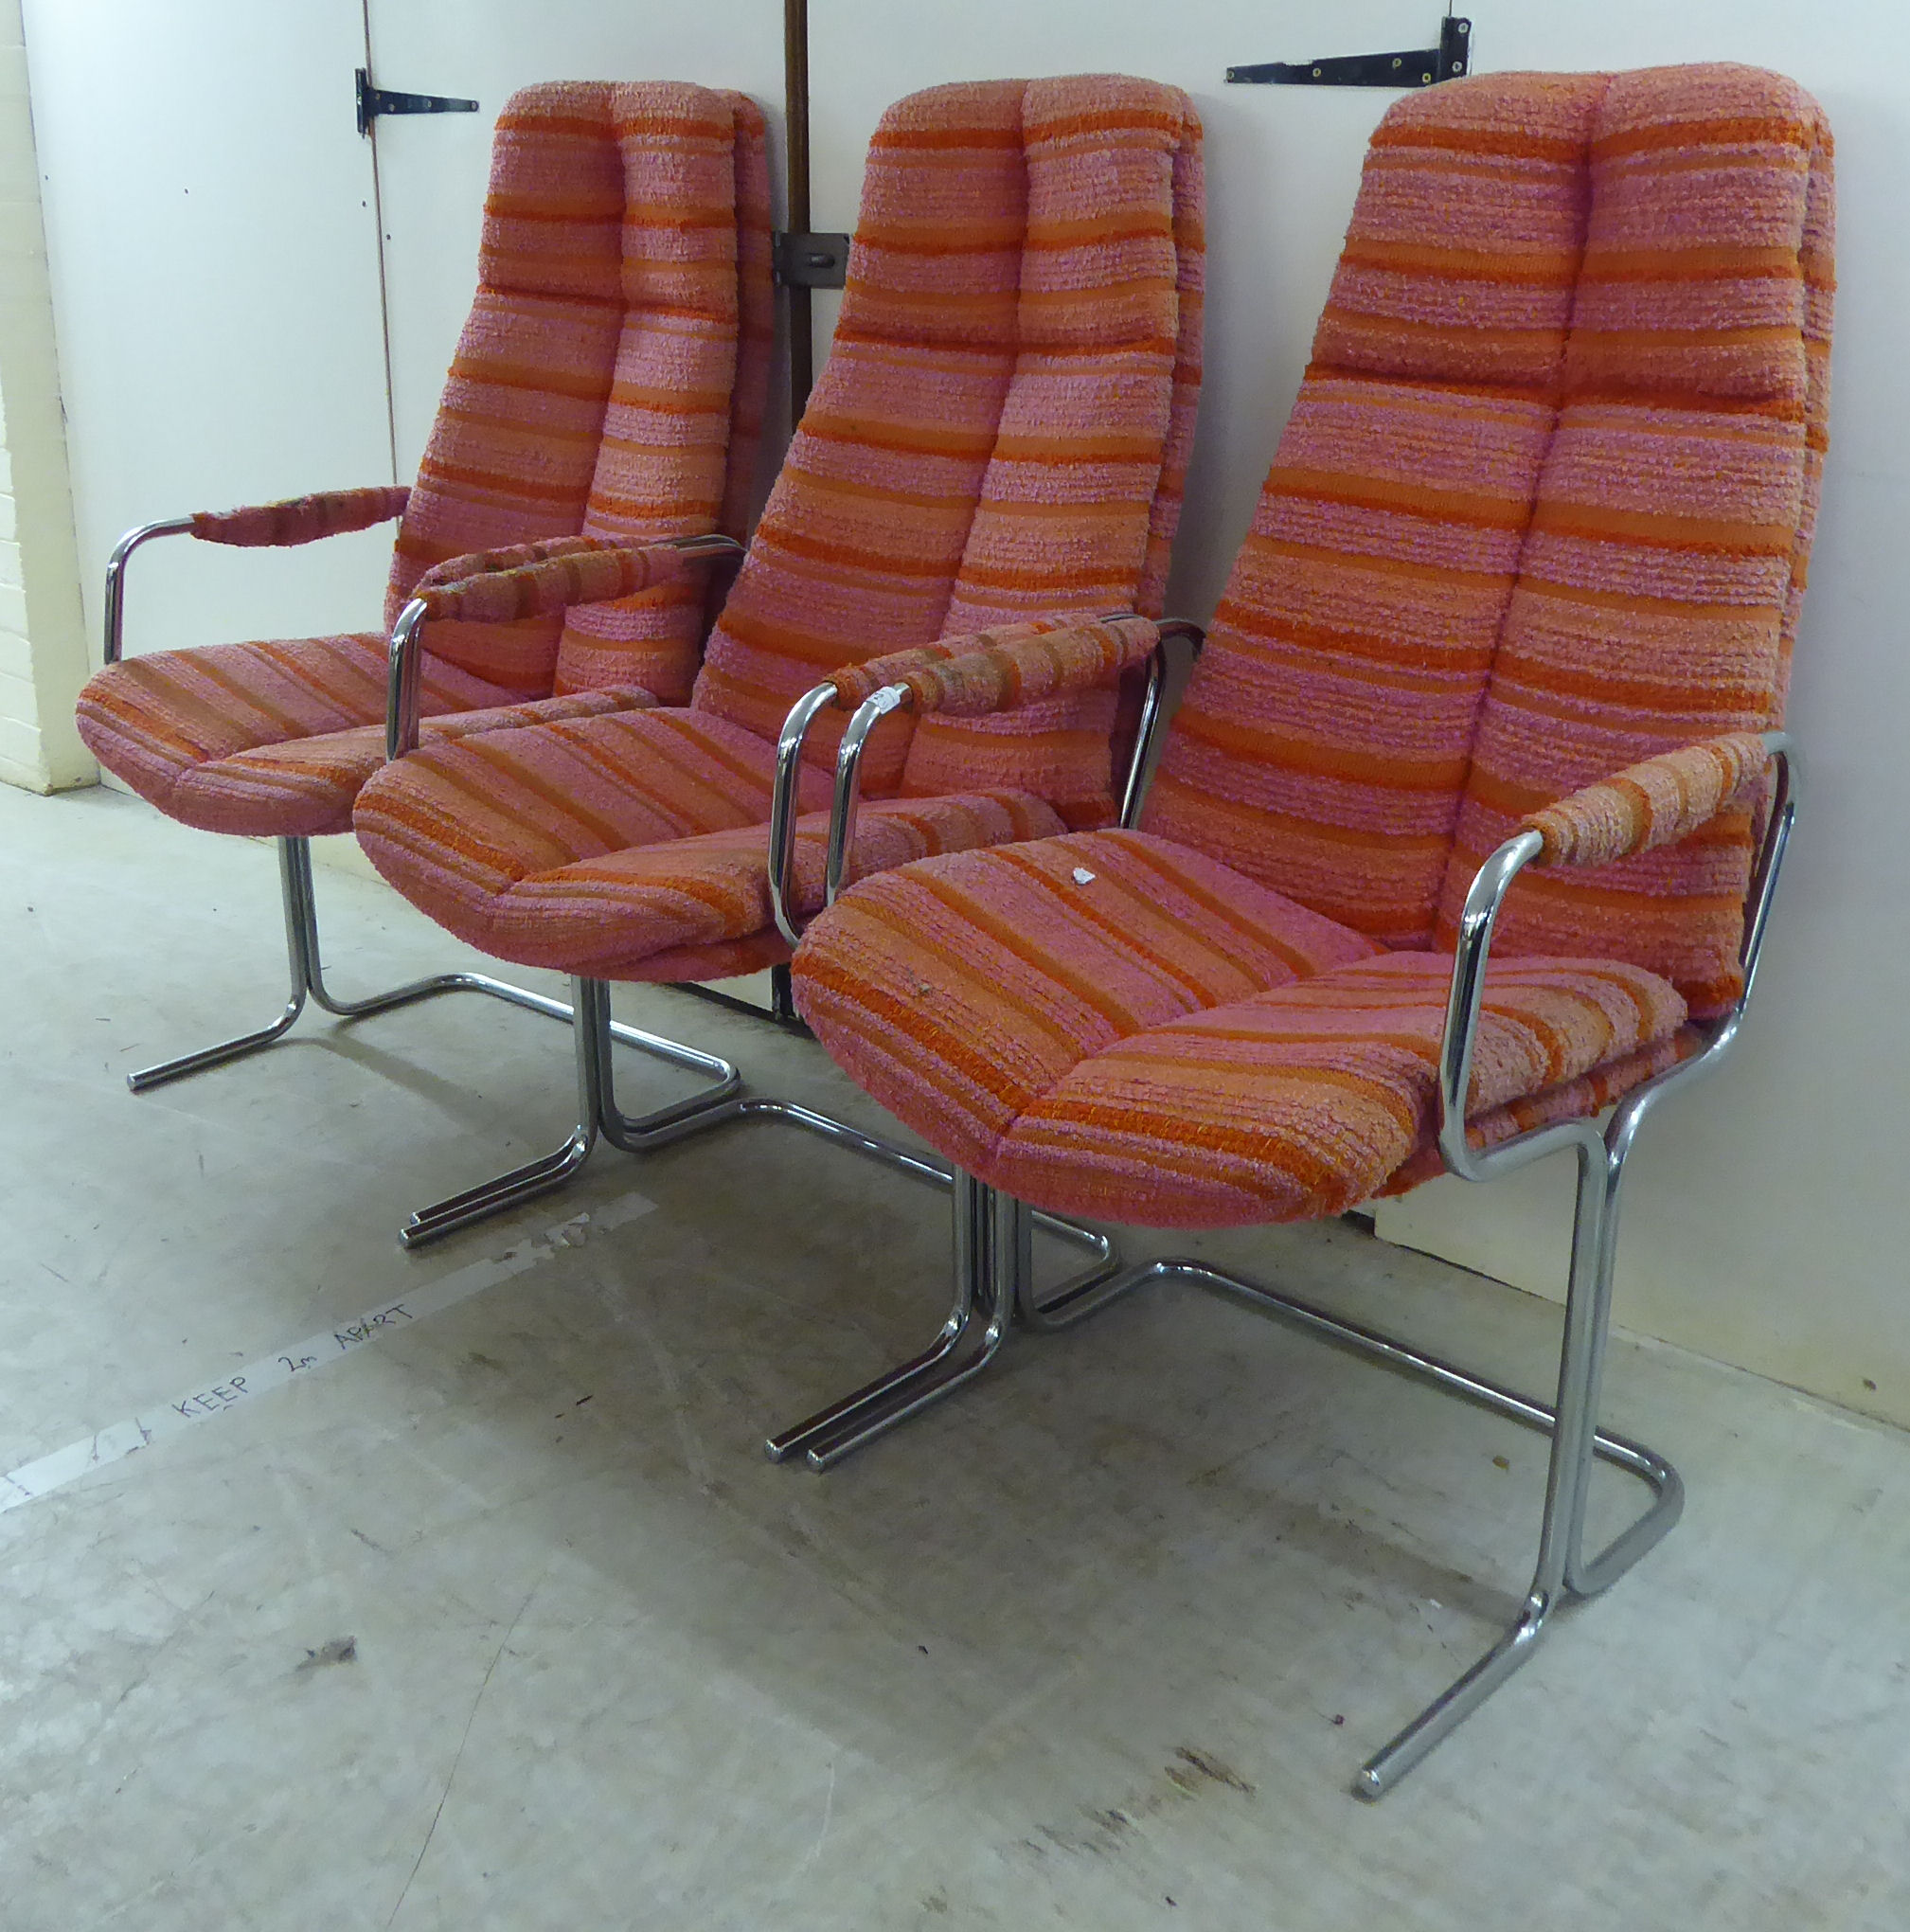 A set of three 1960s Pieff Furniture chromium plated steel dining chairs with orange and pink - Image 2 of 3